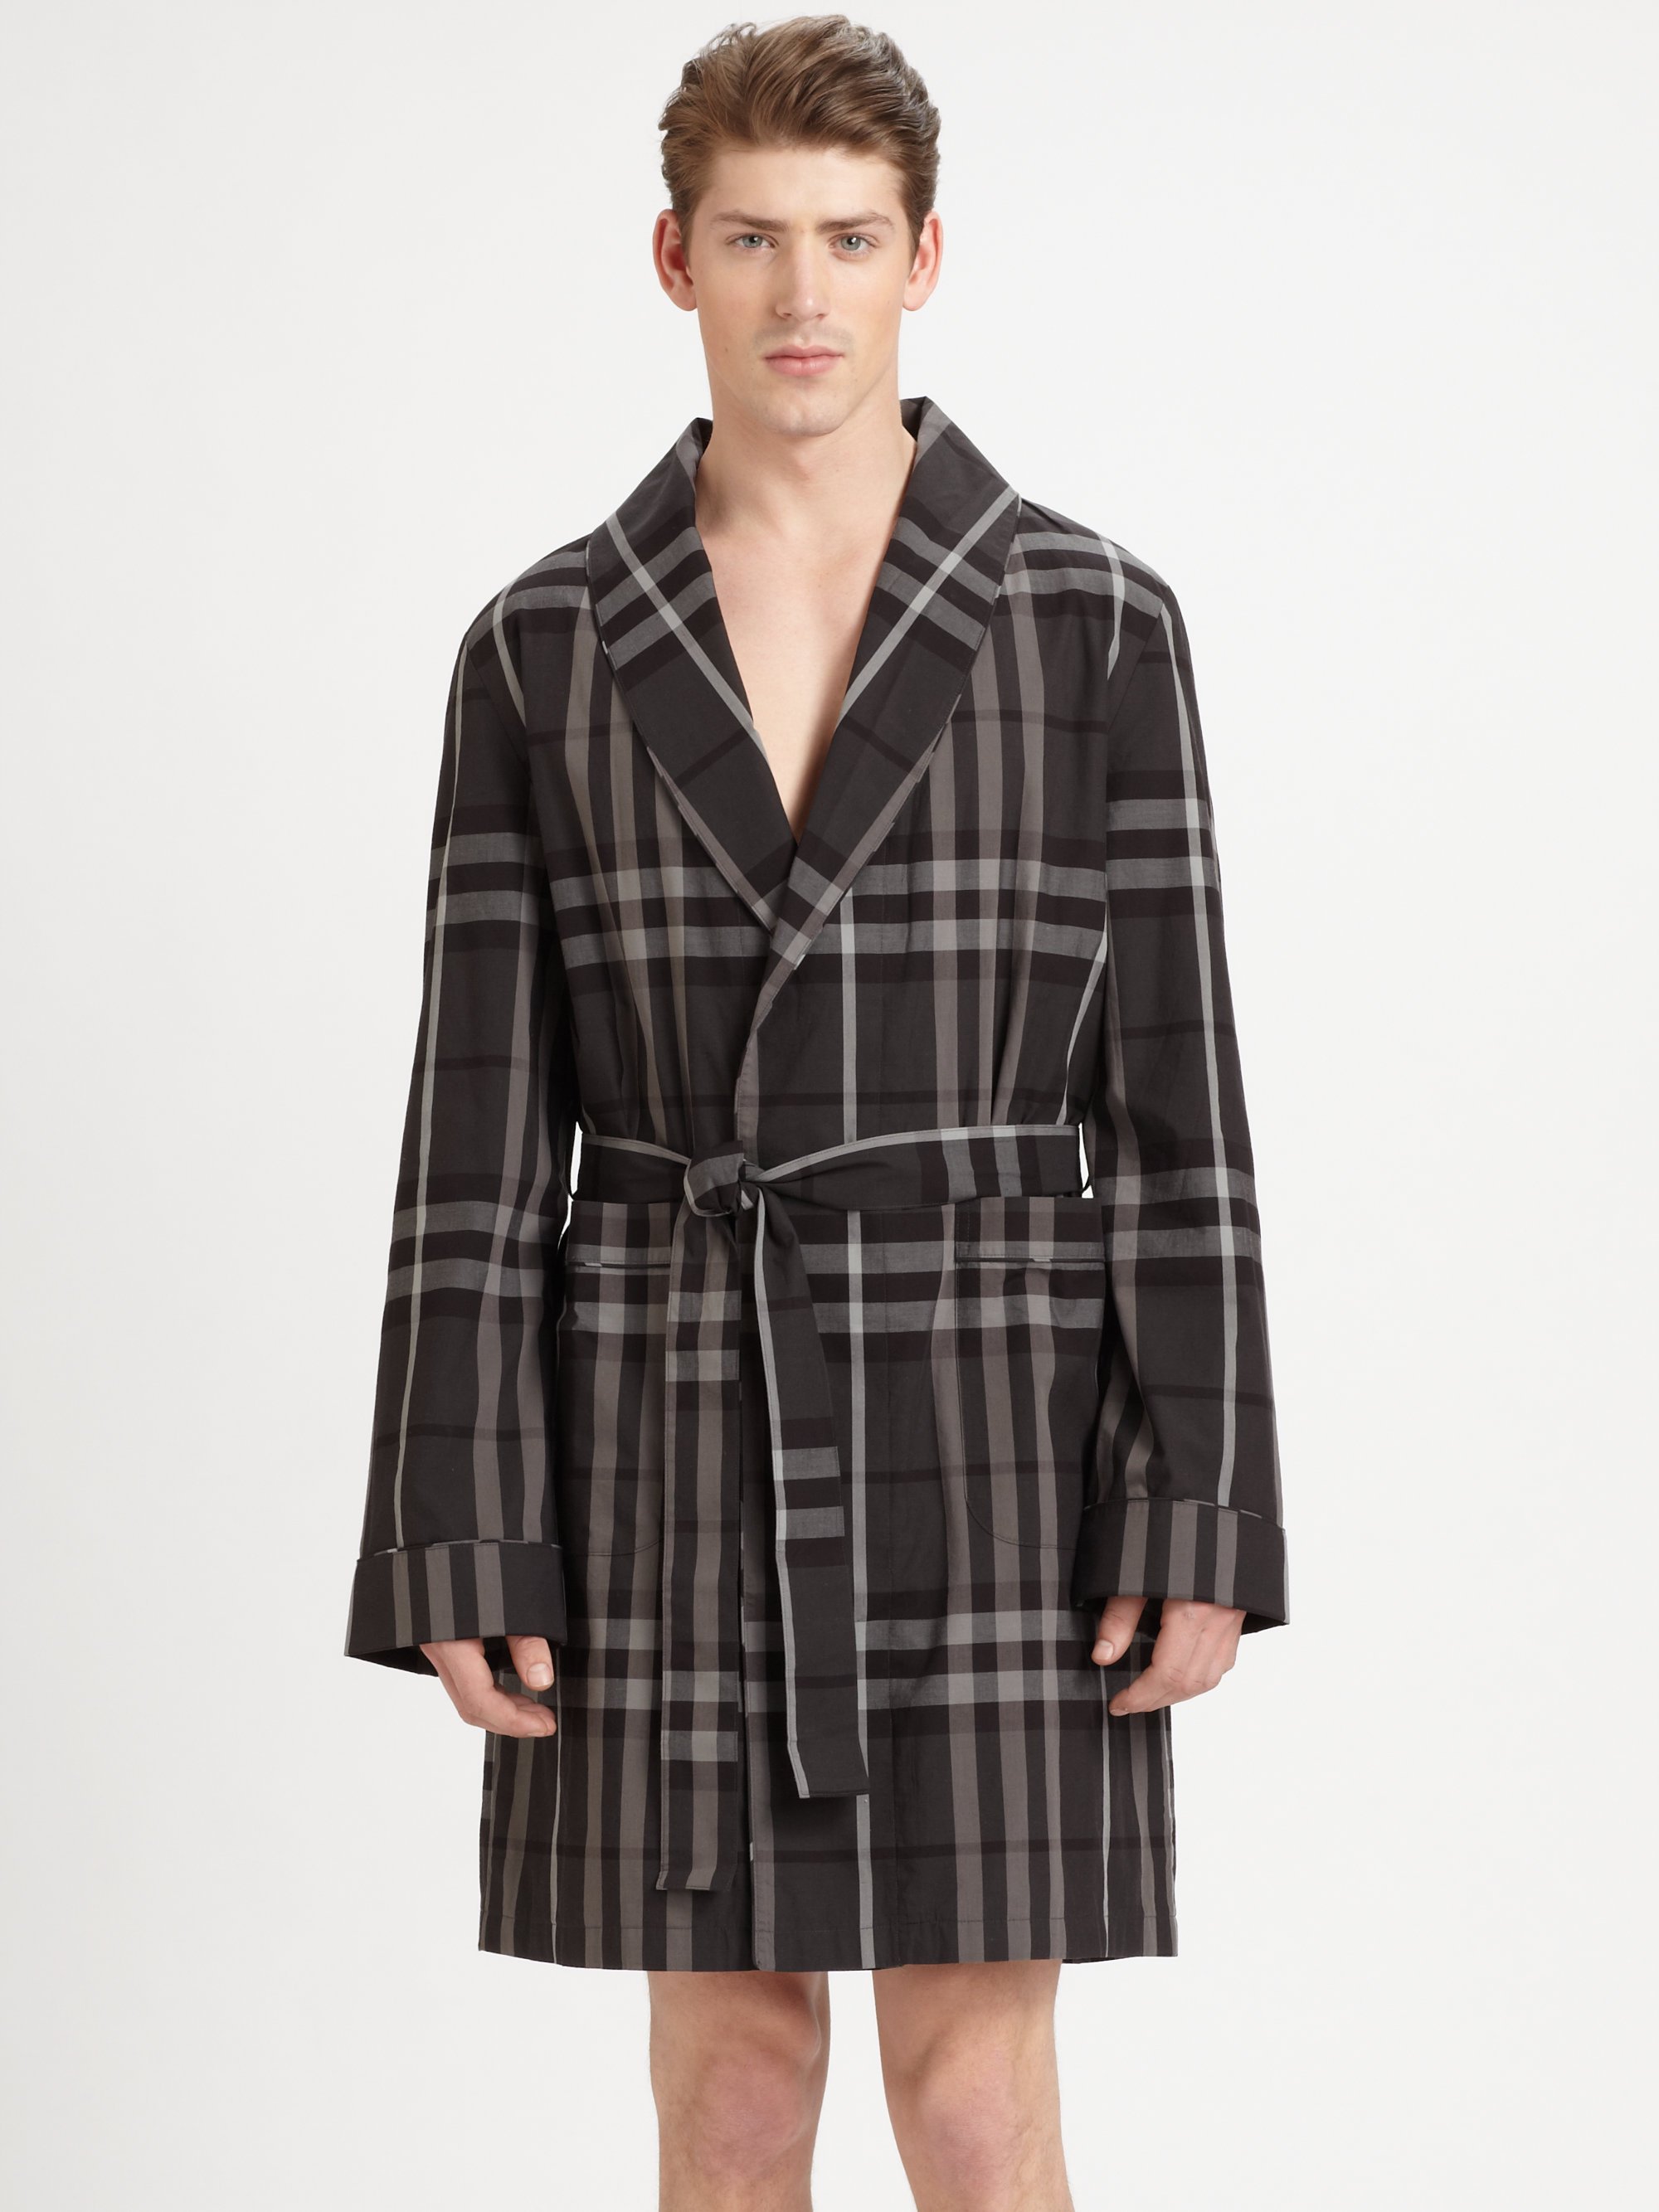 Burberry Check Robe in Dark Charcoal (Black) for Men - Lyst